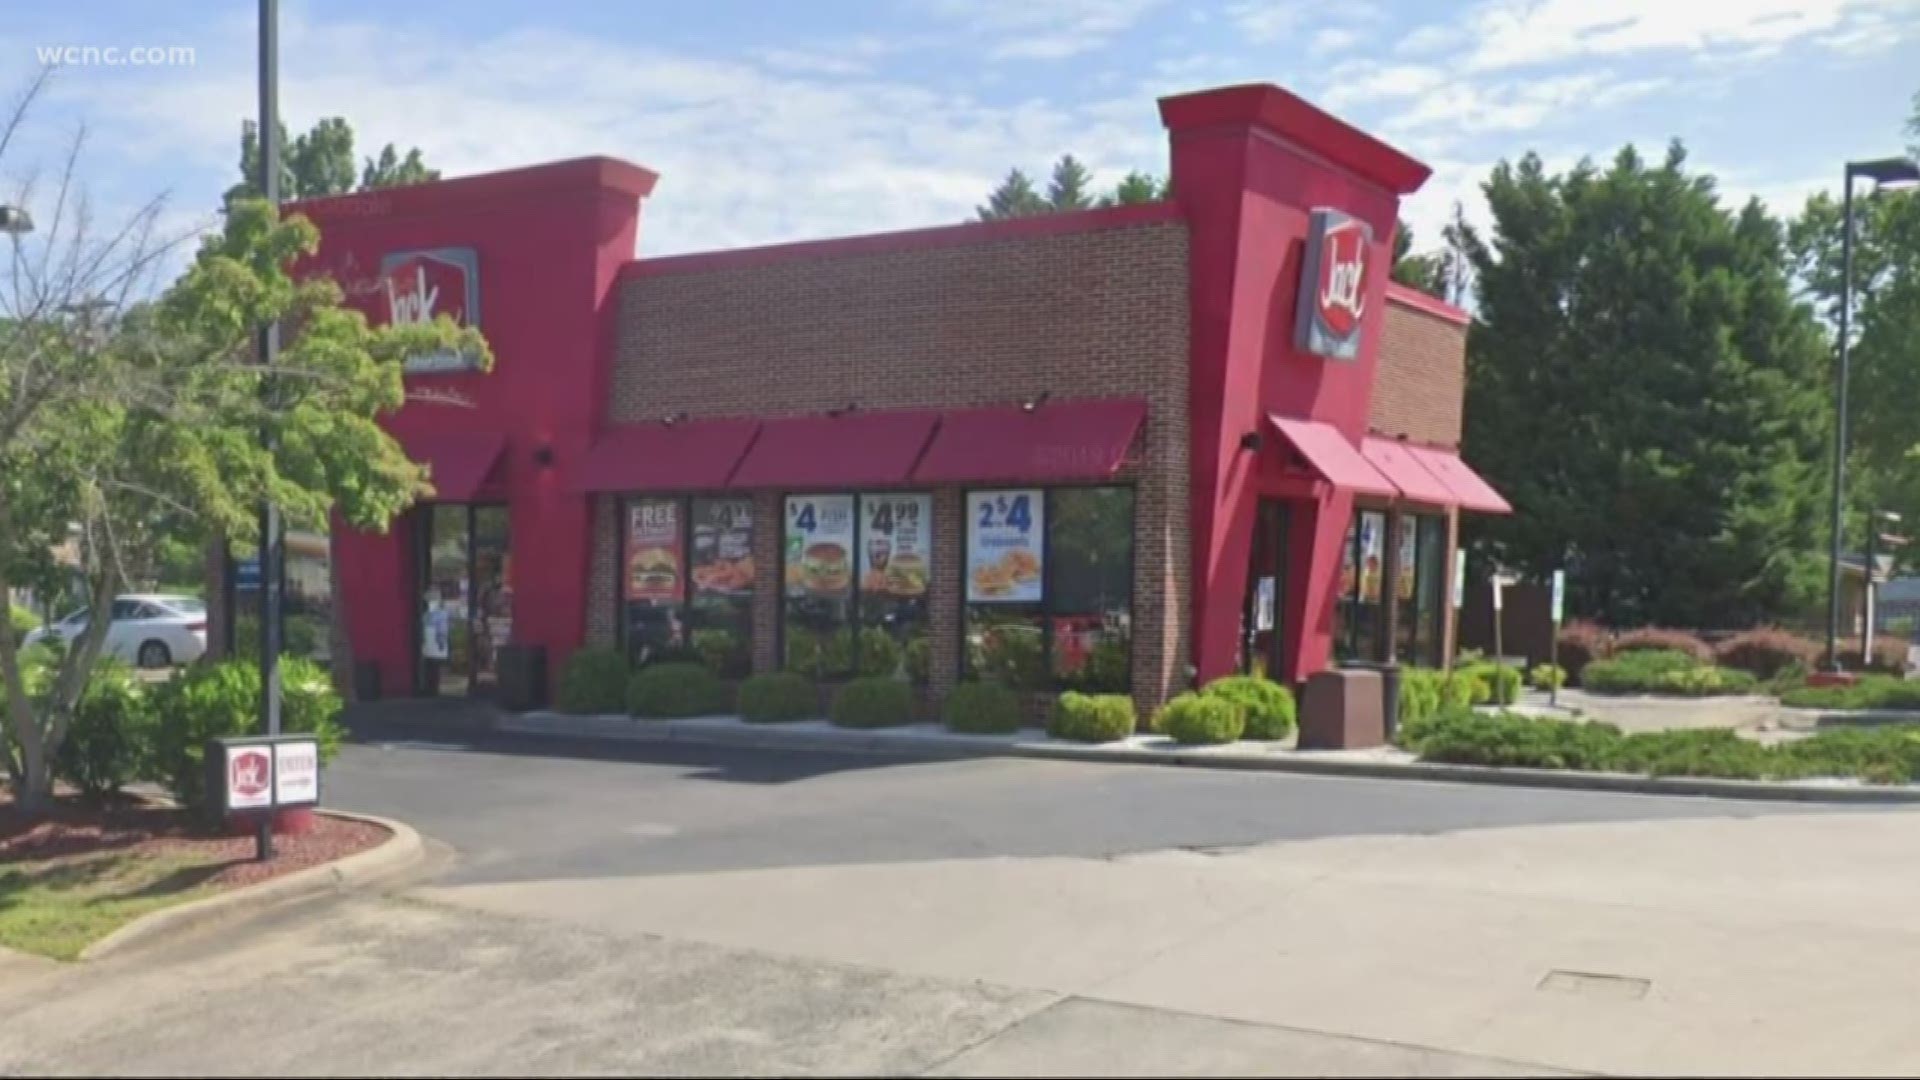 An employee at Jack in the Box on Randolph Road was seen barehanding fries and other restaurants on the report care had temperature issues.